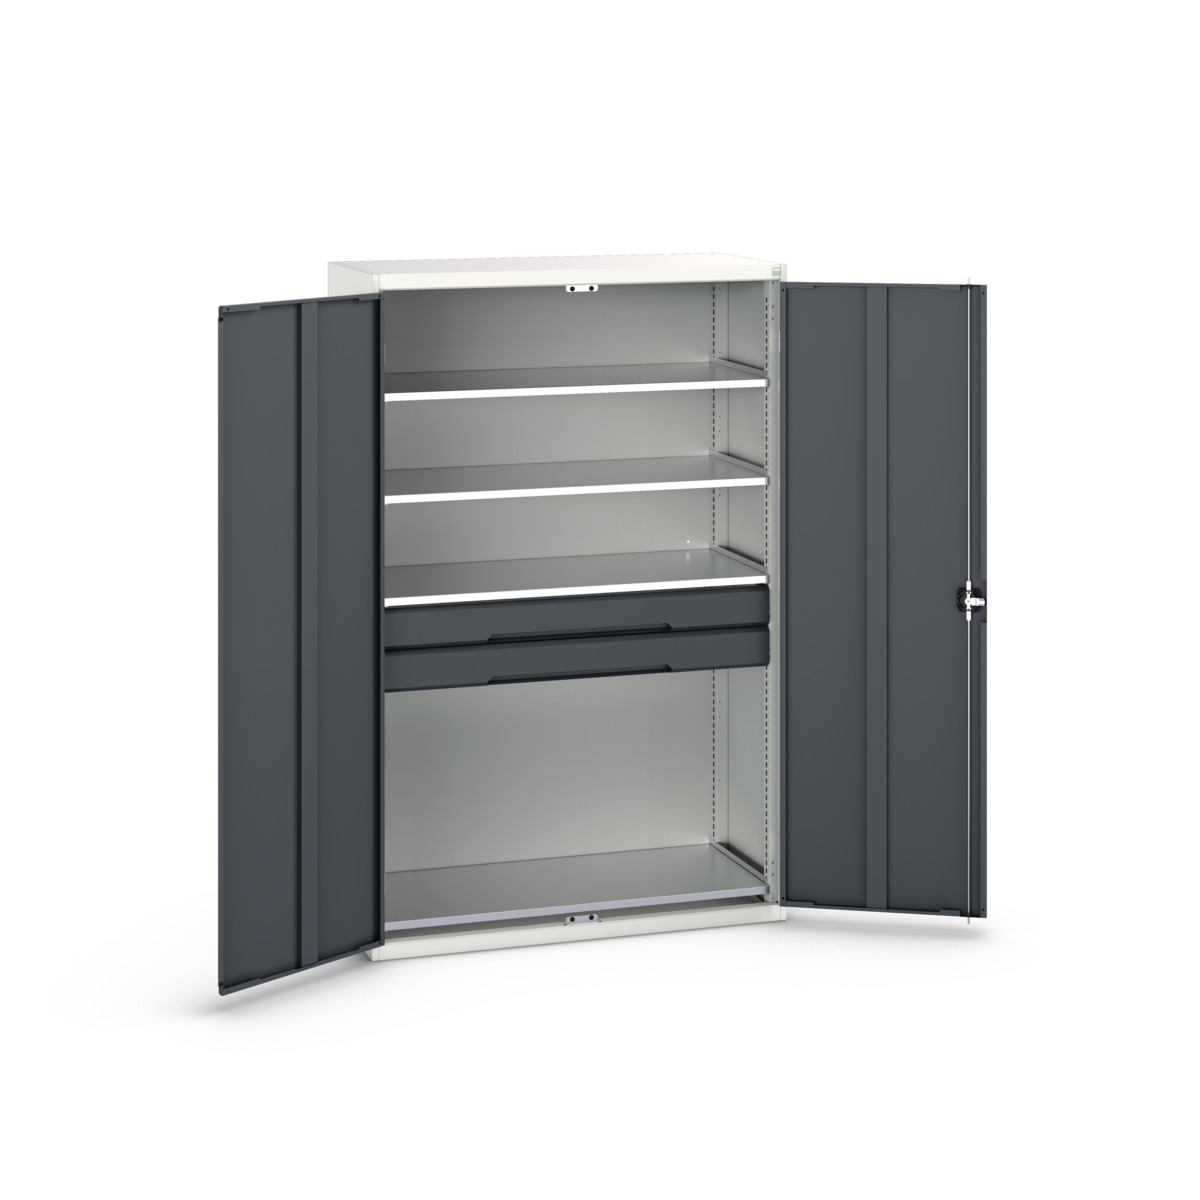 16926654.19 - verso kitted cupboard